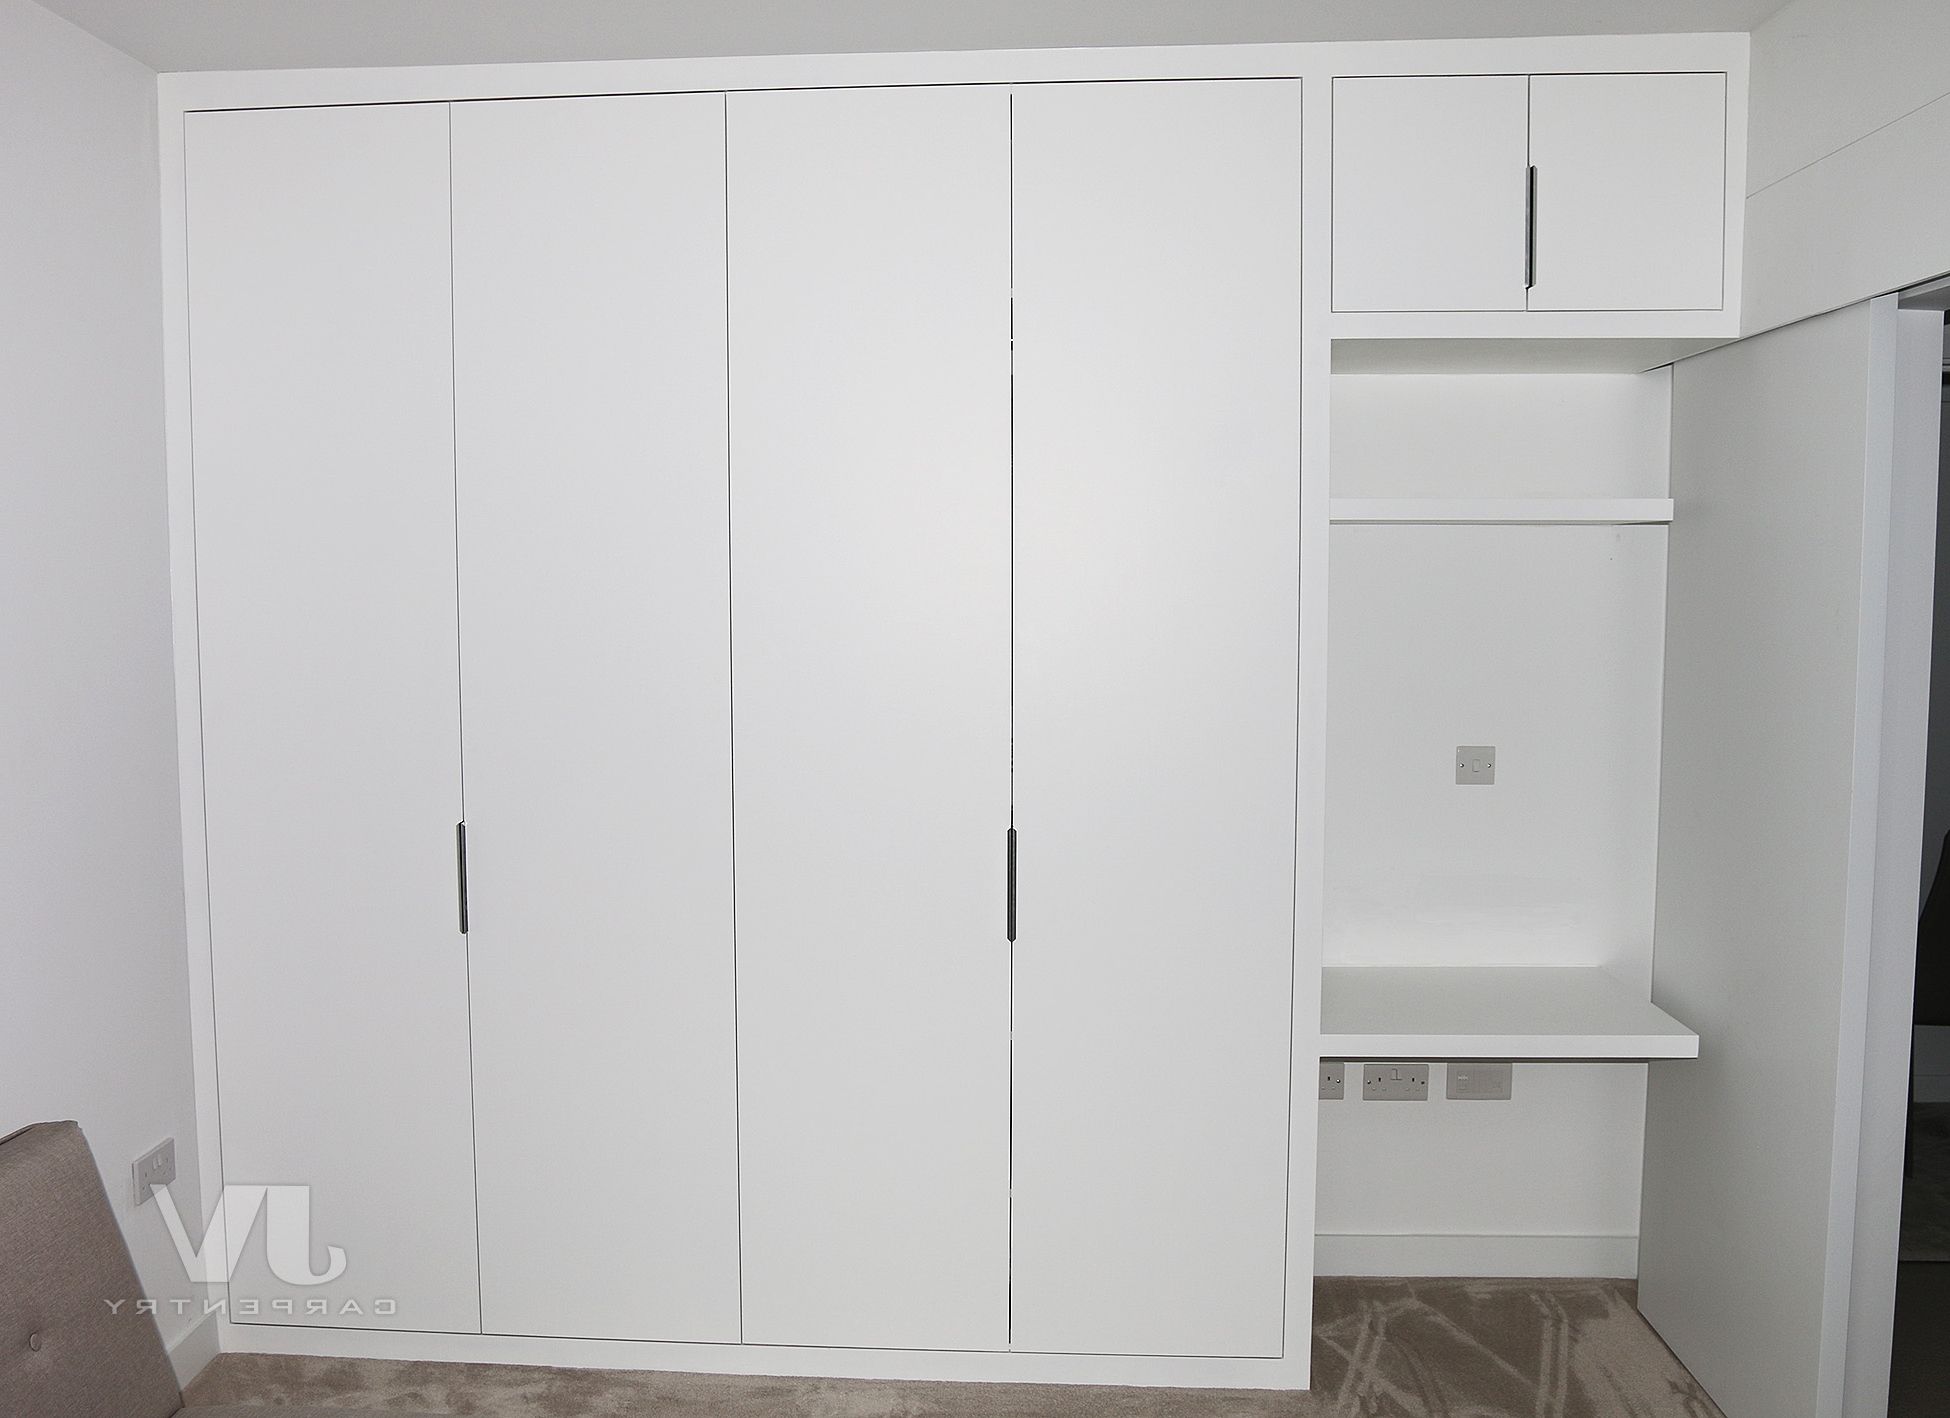 9 Fitted Wardrobes With Dressing Table Ideas | Jv Carpentry Inside Wardrobes And Dressing Tables (Gallery 15 of 20)